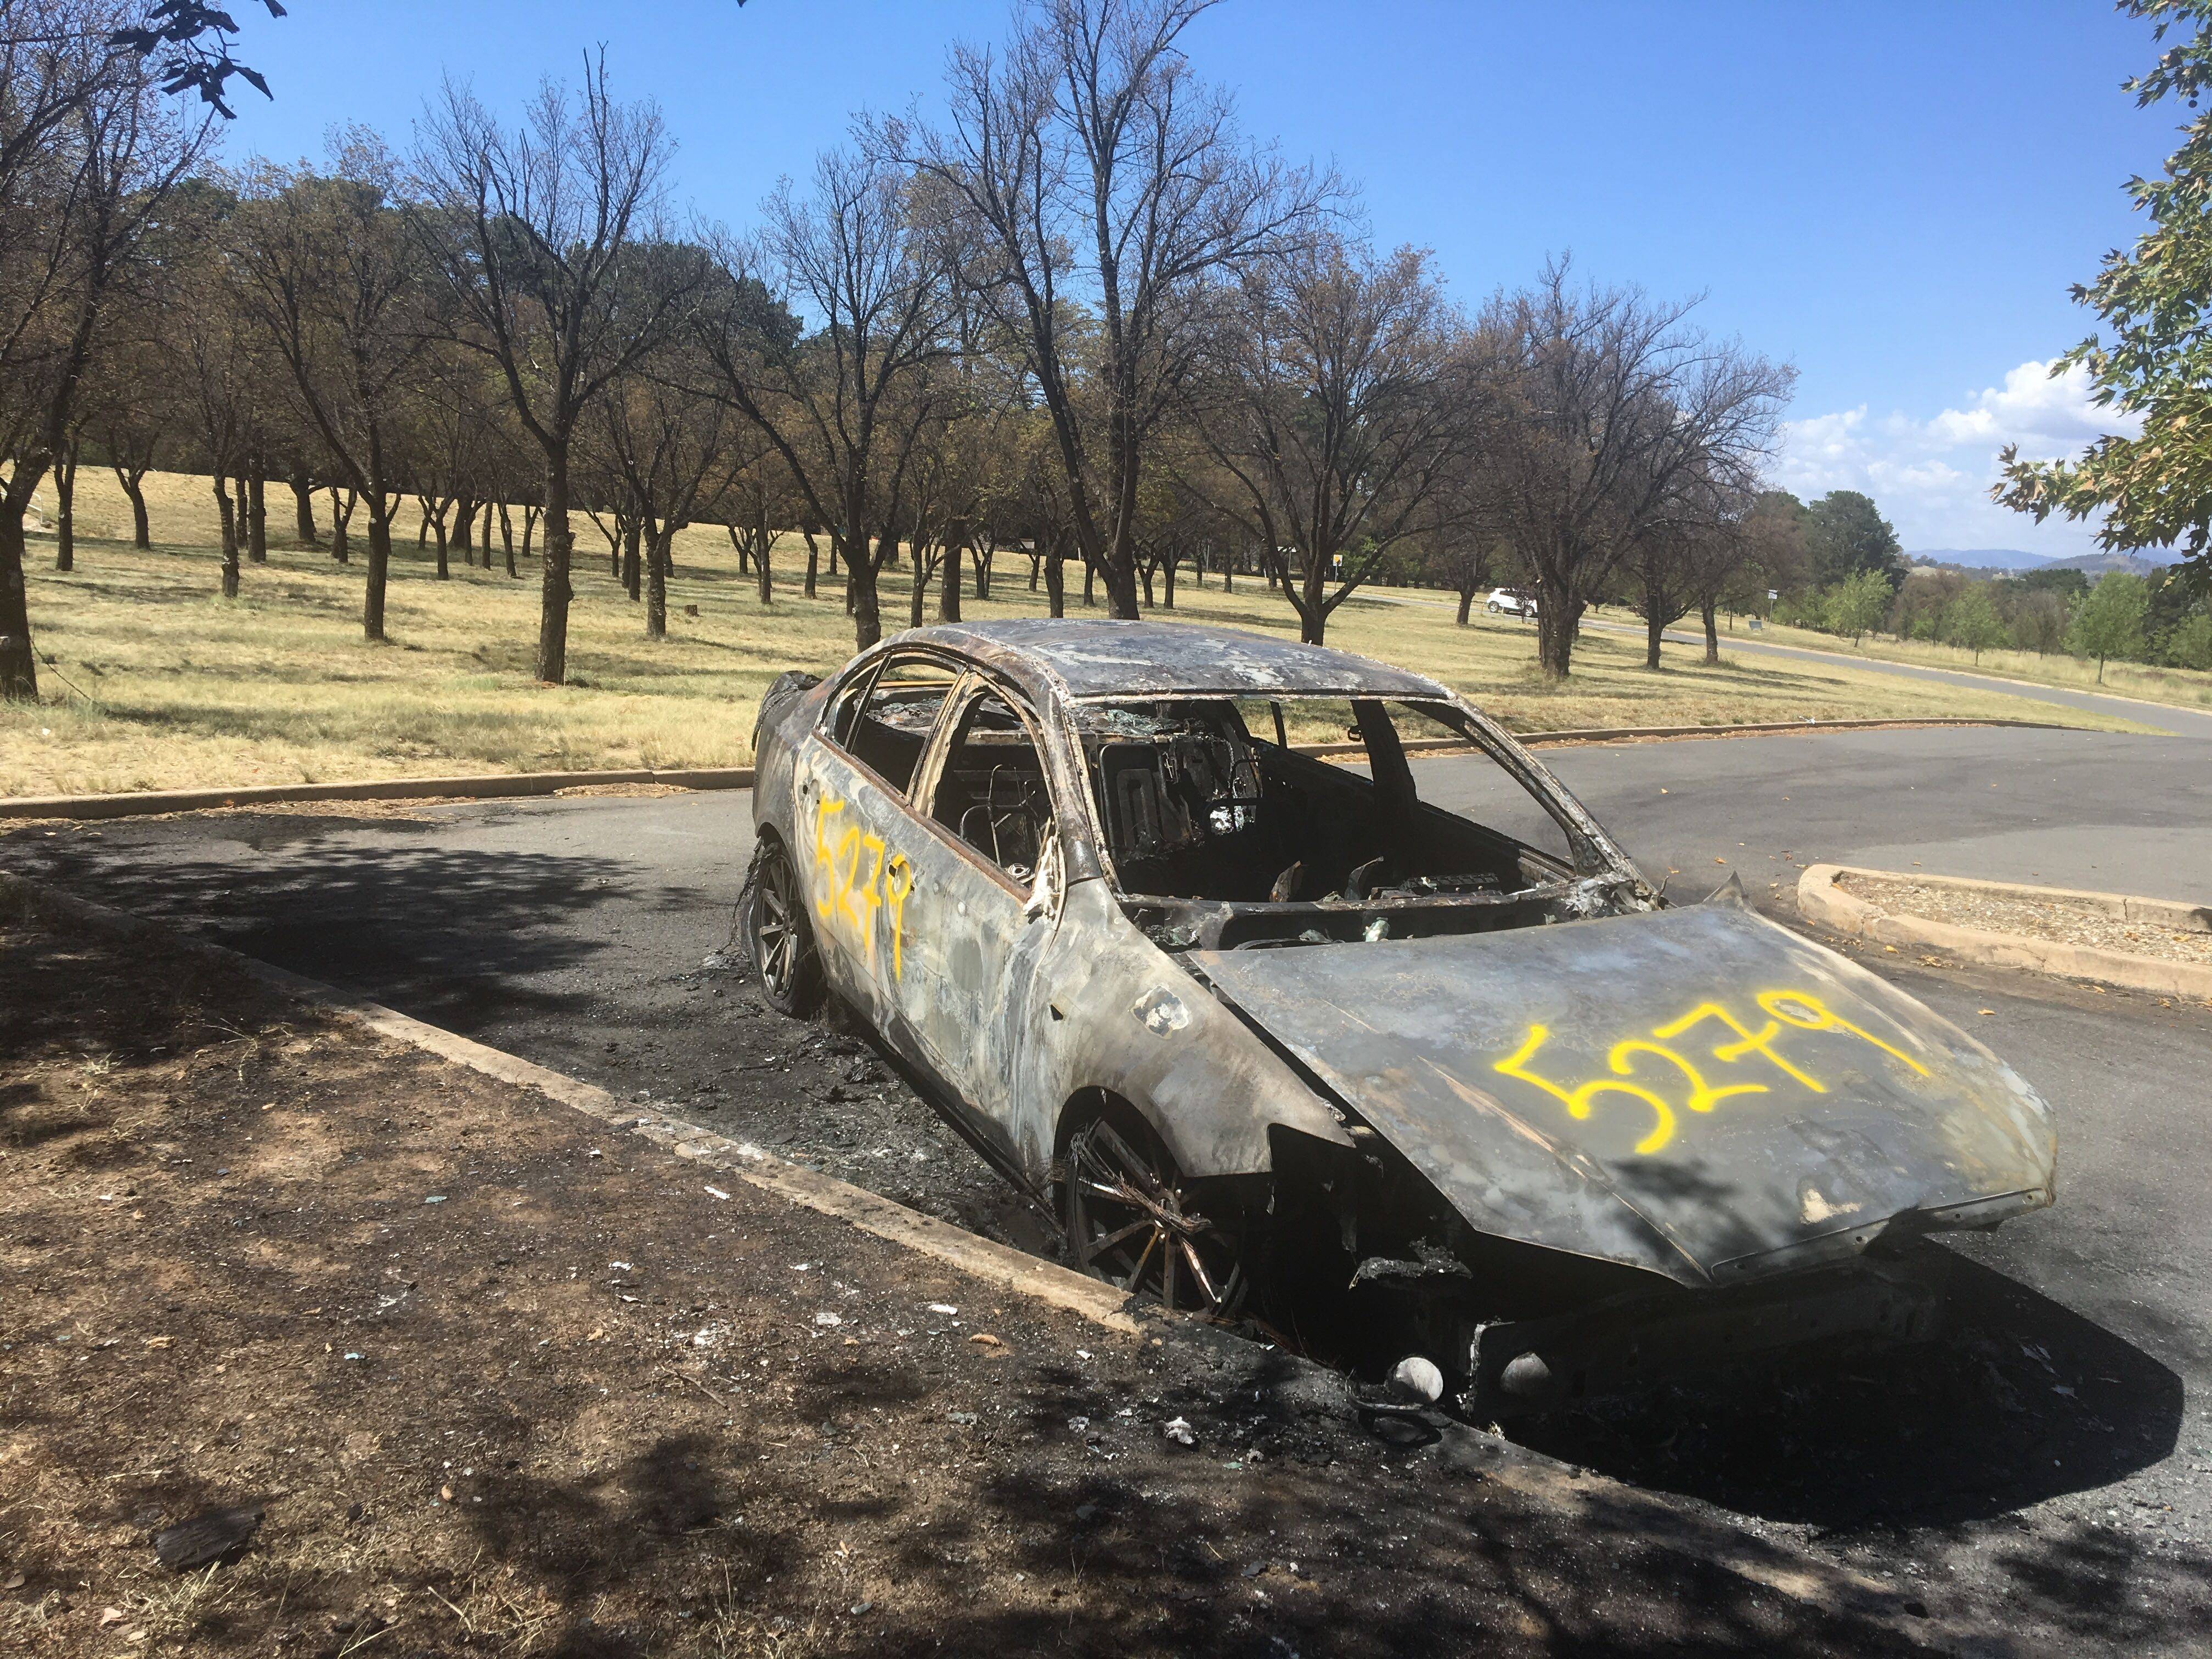 Police union believes car arsonists are working as a group